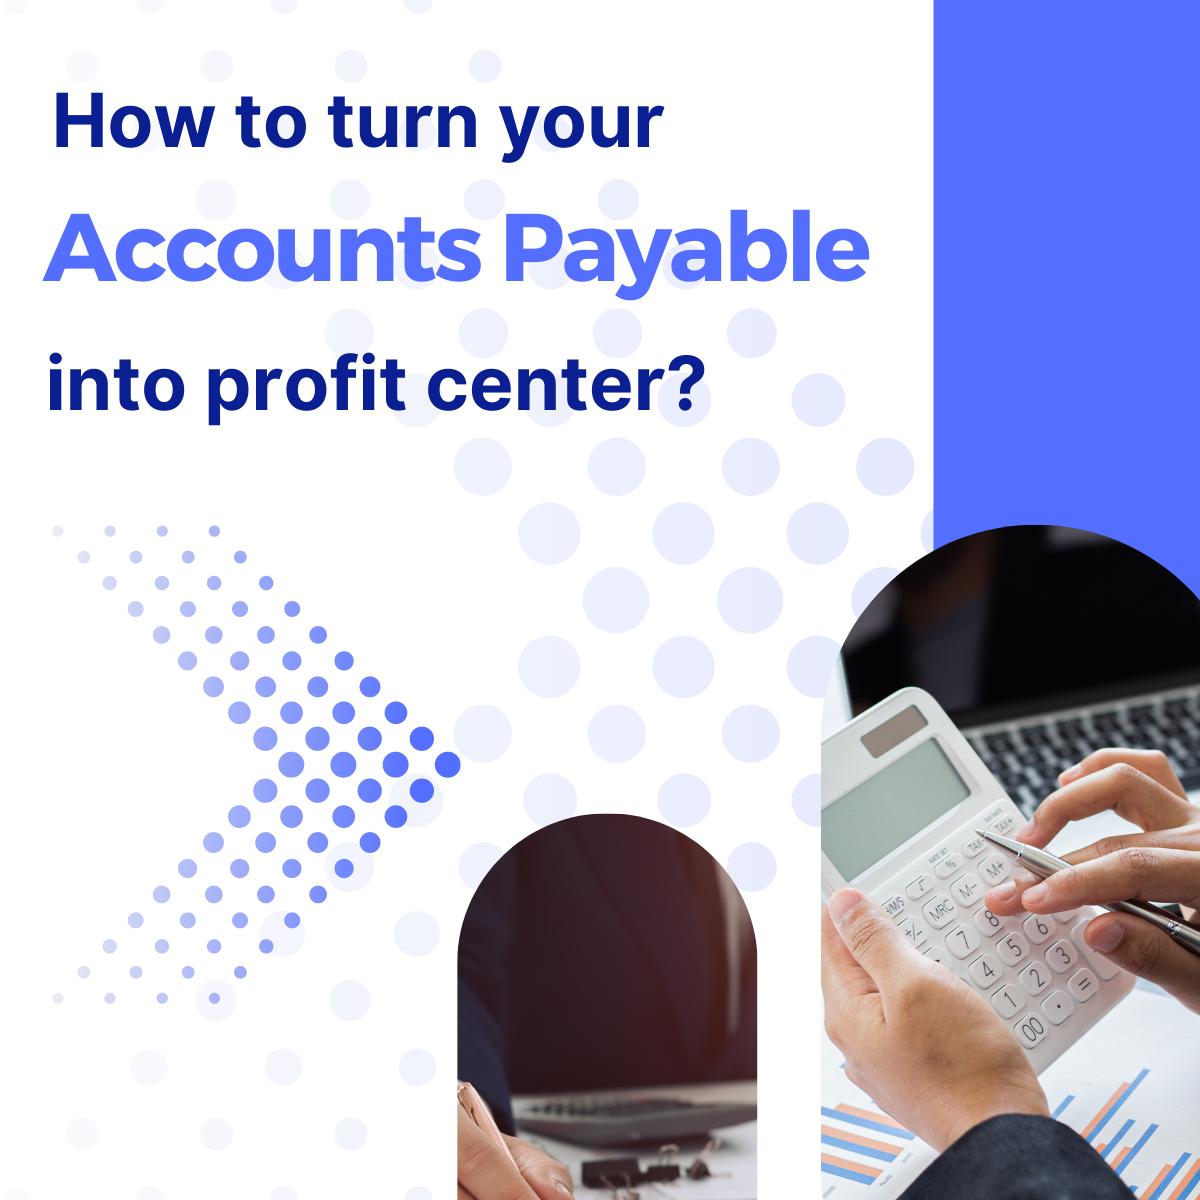 How to turn your Accounts Payable into a profit center?